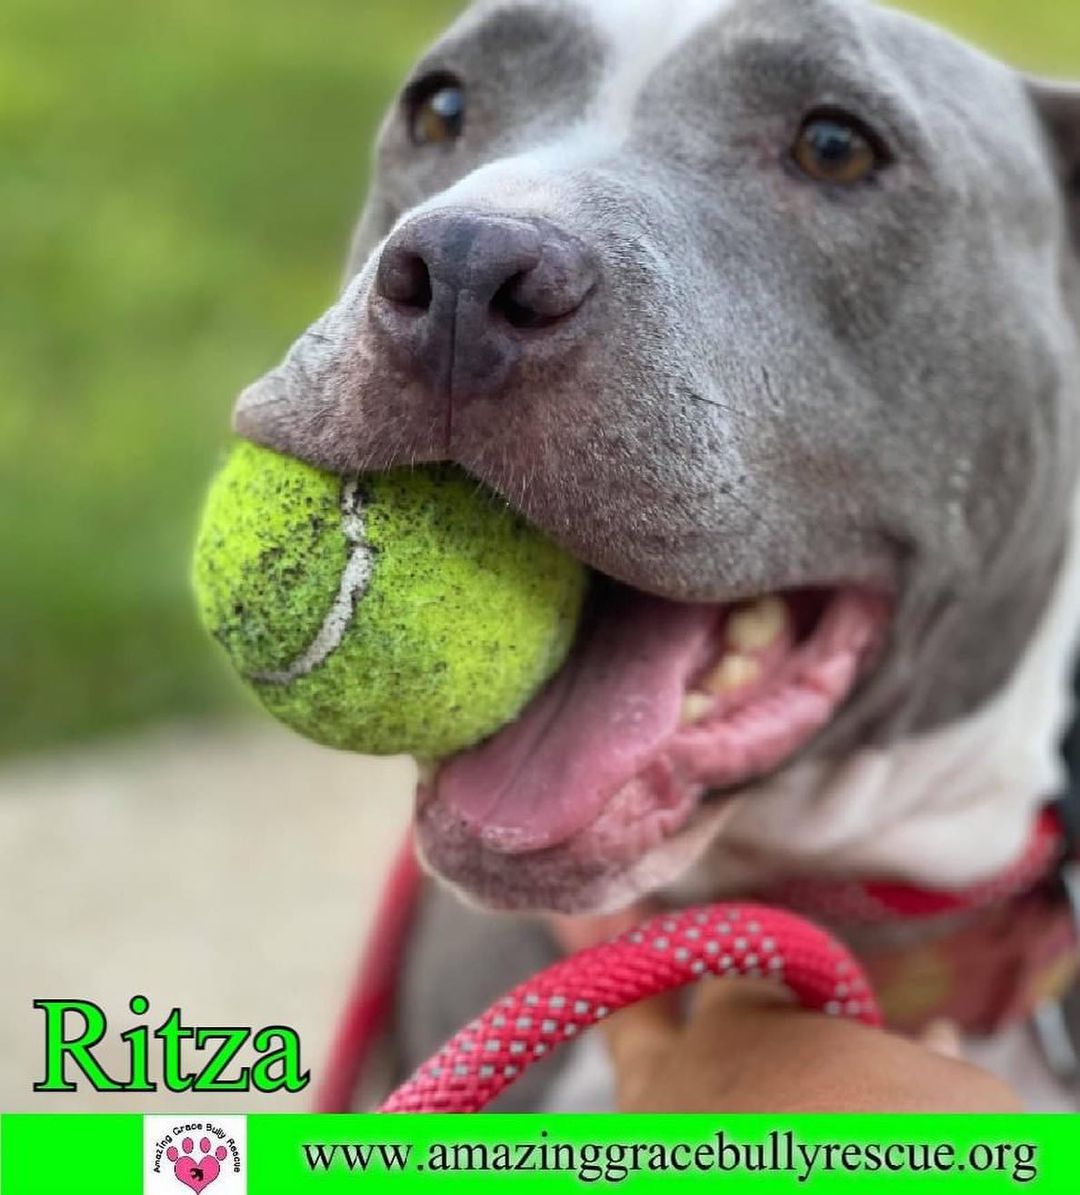 Ritza was a street dog, living at a UPS warehouse in Alabama. It took 8 months to catch her but an amazing and determined UPS worker caught her, (and brought to our rescue) just before she gave birth to her last litter of puppies. 🐾

Ritza is now with an Amazing Foster who has slowly and patiently worked with her to allow this sweet girl to come out of her shell and blossom. Ritza is a beautiful blue Staffordshire Terrier mix who is probably about 5 years old but she's had a hard life living outdoors and of course is heartworm positive. Her treatment is included in her adoption fee so please don't let that stop you from reading about this thrown away treasure. Ritza has so much love to give! She absolutely loves kids, and is very social to people. ❤️

We can only imagine what she had to endure to survive before we got her, so she needs a slow introduction to dogs, and has made several doggy buddies, but would do best in a home without cats! She does get a bit obsessed with balls and has been known to go on her daily walks with one in her mouth!

Please reach out with any questions about this sweet good girl! And as always, use the link in our bio to apply to adopt! 🥰

<a target='_blank' href='https://www.instagram.com/explore/tags/adoptable/'>#adoptable</a> <a target='_blank' href='https://www.instagram.com/explore/tags/adoptdontshop/'>#adoptdontshop</a> <a target='_blank' href='https://www.instagram.com/explore/tags/adoptme/'>#adoptme</a> <a target='_blank' href='https://www.instagram.com/explore/tags/dontbullymybreed/'>#dontbullymybreed</a> <a target='_blank' href='https://www.instagram.com/explore/tags/fosterssavelives/'>#fosterssavelives</a> <a target='_blank' href='https://www.instagram.com/explore/tags/bluepitbull/'>#bluepitbull</a> <a target='_blank' href='https://www.instagram.com/explore/tags/pitbullsofinstagram/'>#pitbullsofinstagram</a> <a target='_blank' href='https://www.instagram.com/explore/tags/pittienation/'>#pittienation</a> <a target='_blank' href='https://www.instagram.com/explore/tags/pittiesofinstagram/'>#pittiesofinstagram</a> <a target='_blank' href='https://www.instagram.com/explore/tags/dogsofpensacola/'>#dogsofpensacola</a> <a target='_blank' href='https://www.instagram.com/explore/tags/makeadifference/'>#makeadifference</a> <a target='_blank' href='https://www.instagram.com/explore/tags/volunteer/'>#volunteer</a> <a target='_blank' href='https://www.instagram.com/explore/tags/rescuedismyfavoritebreed/'>#rescuedismyfavoritebreed</a> <a target='_blank' href='https://www.instagram.com/explore/tags/rescuedogsofinstagram/'>#rescuedogsofinstagram</a>